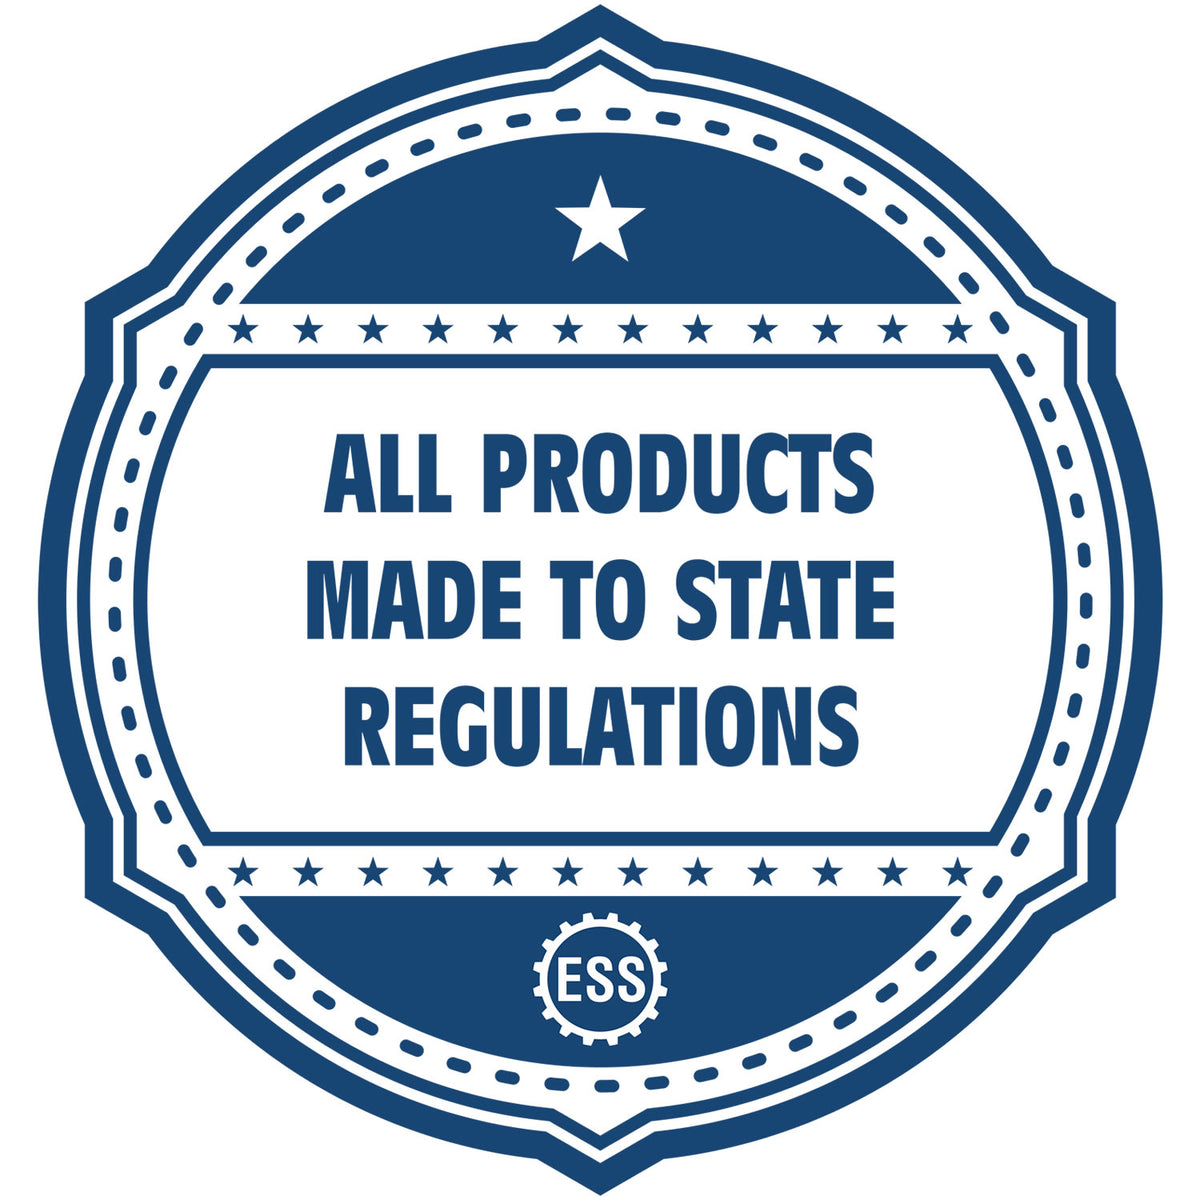 A blue icon or badge for the Heavy Duty Cast Iron Tennessee Geologist Seal Embosser showing that this product is made in compliance with state regulations.